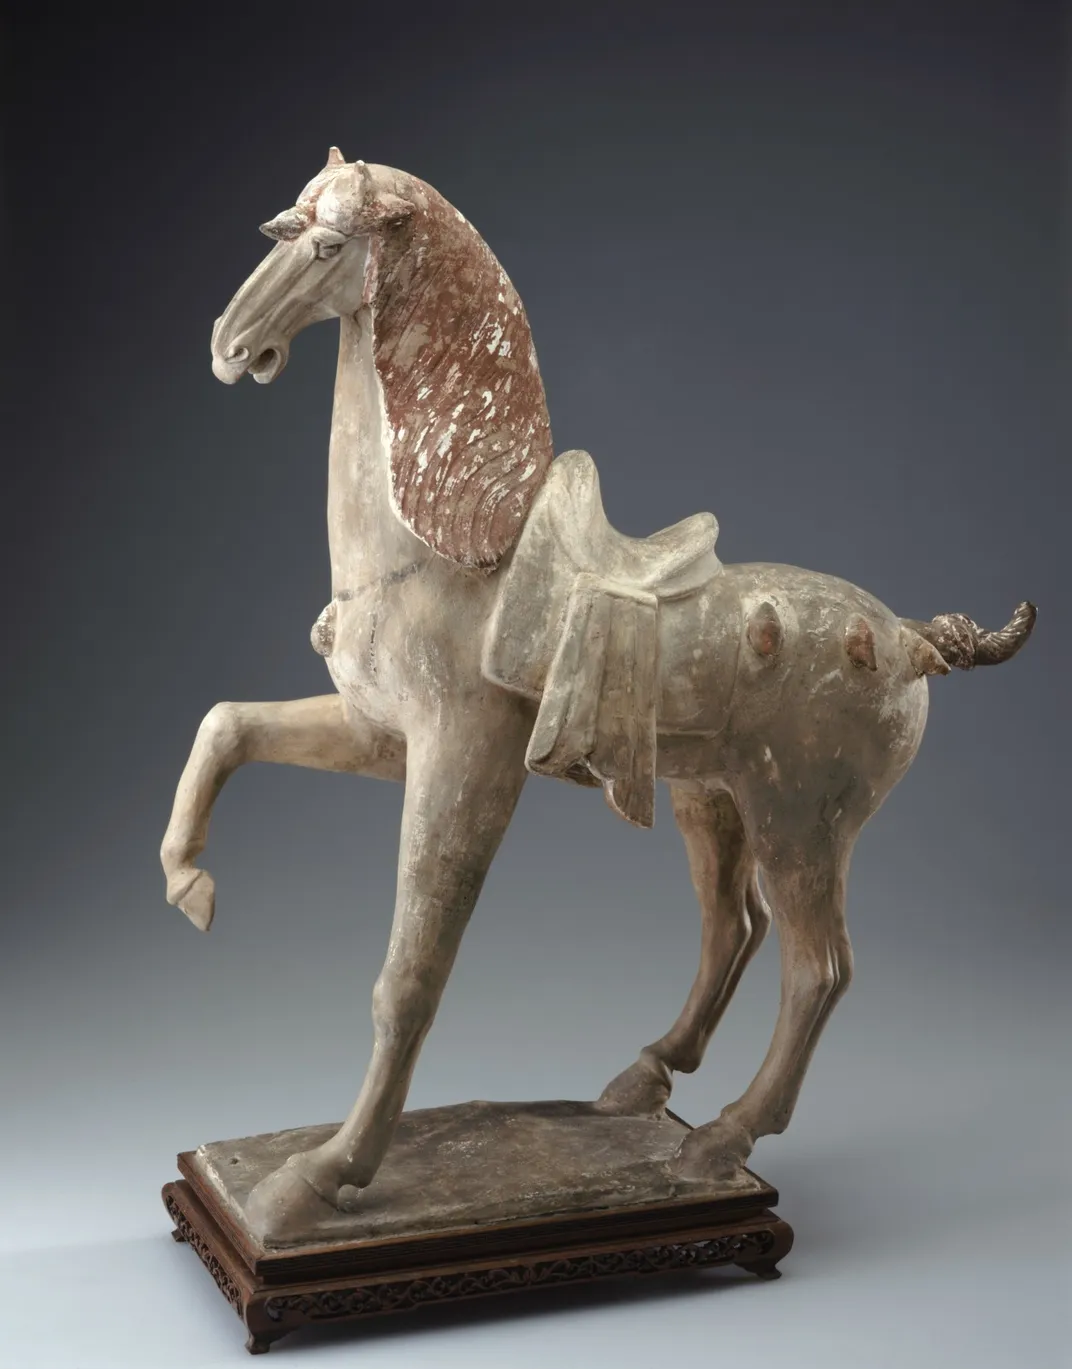 A faience sculpture of a horse with one hoof in the air and decorative tassels on the body and one on the forehead.